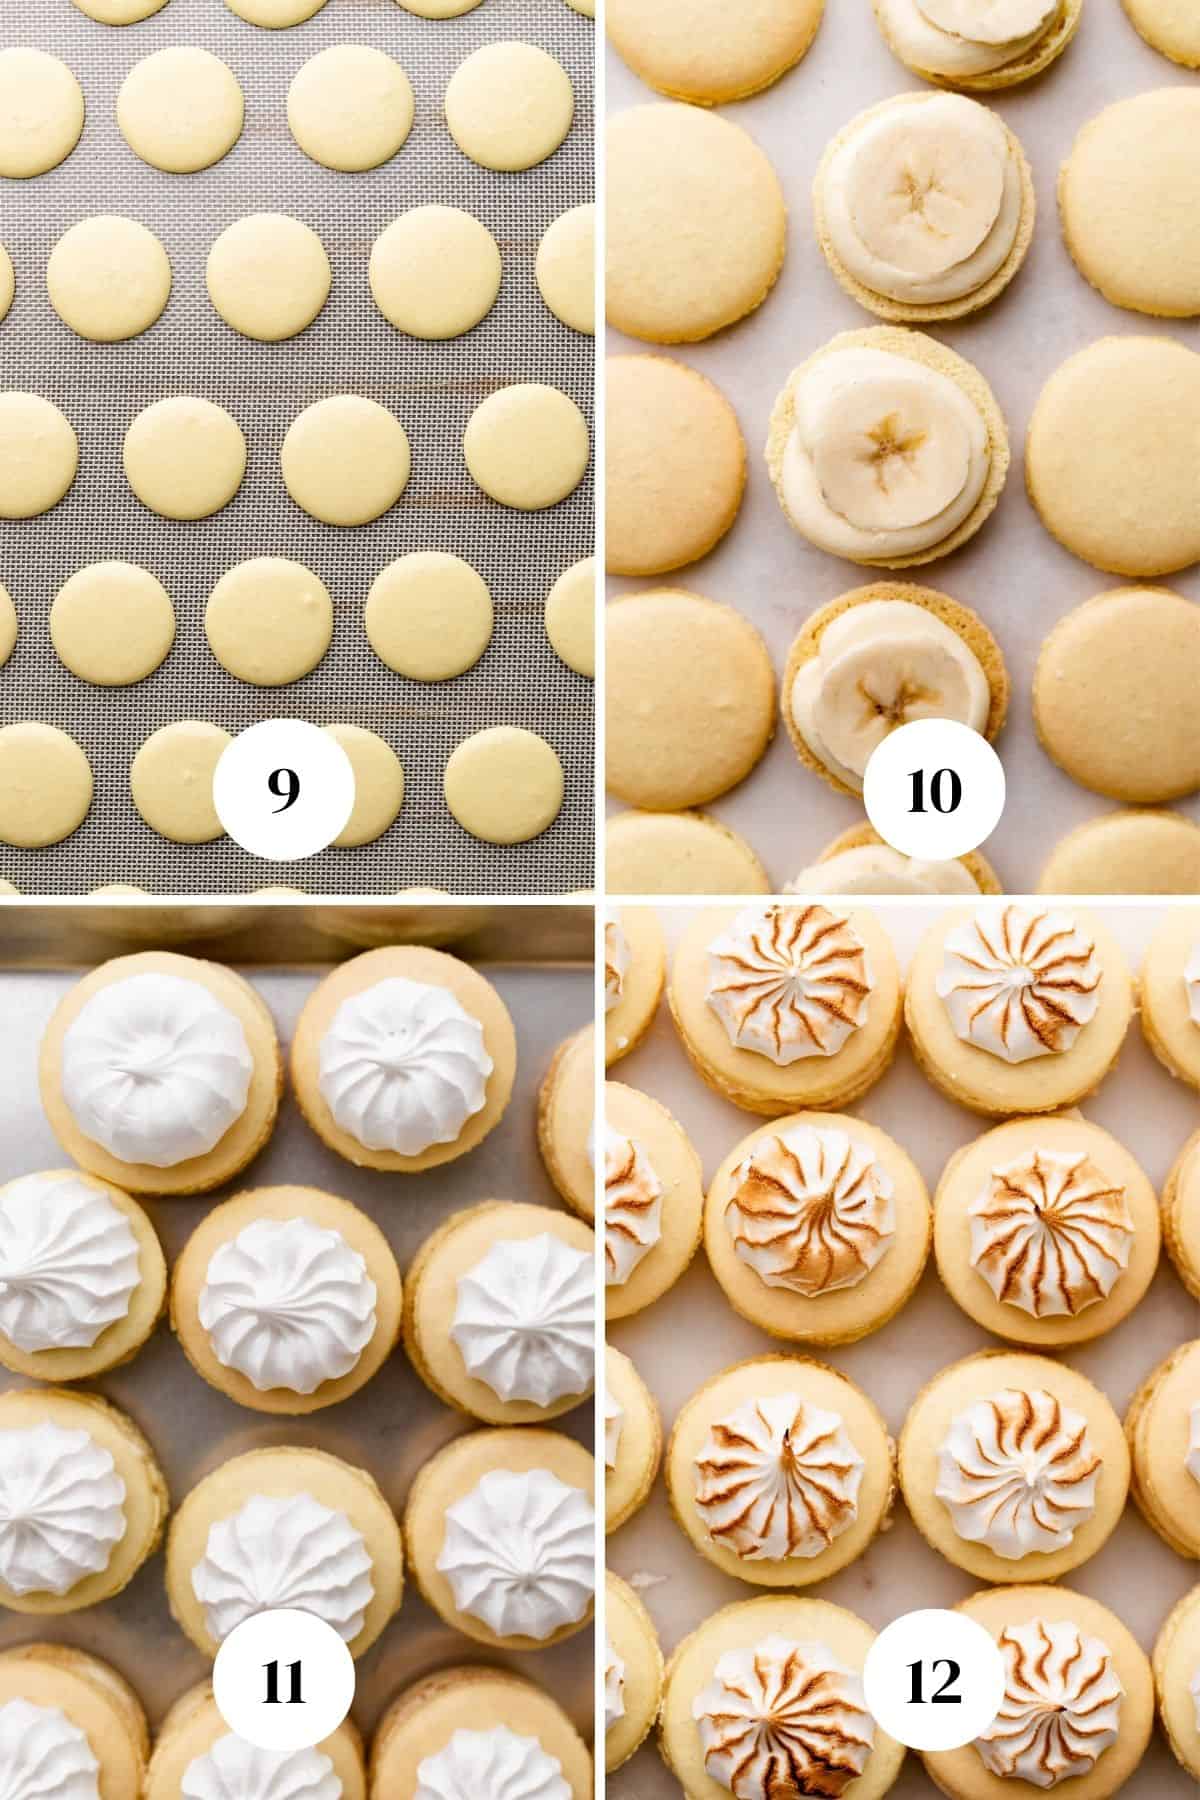 a process collage of the steps for assembling and filling banana macarons.